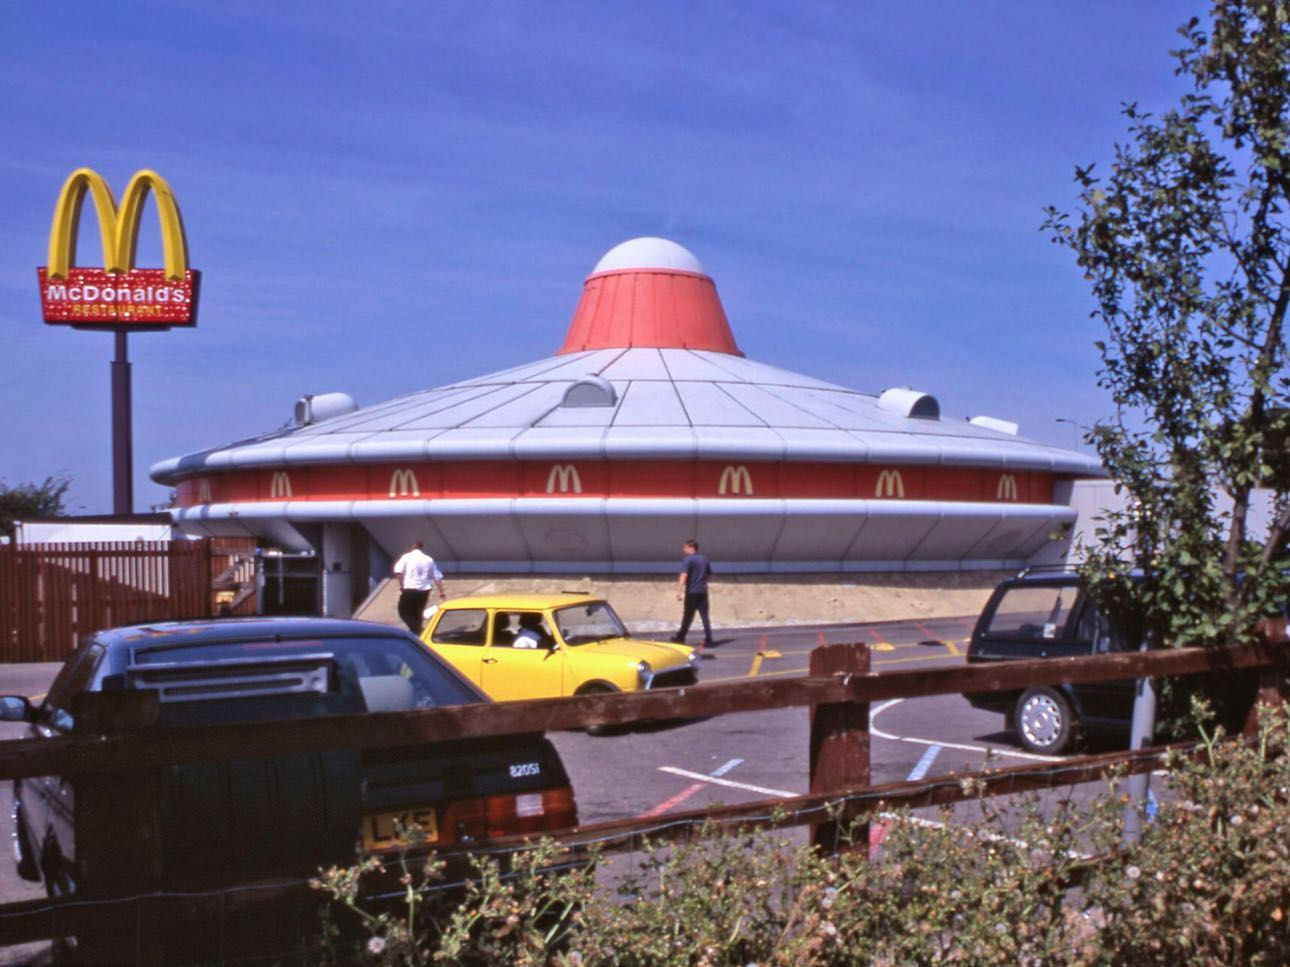 Inside futuristic ‘flying saucer’ McDonald’s with robot rides & ‘nightmare’ drive-thru which lay abandoned for 8 years